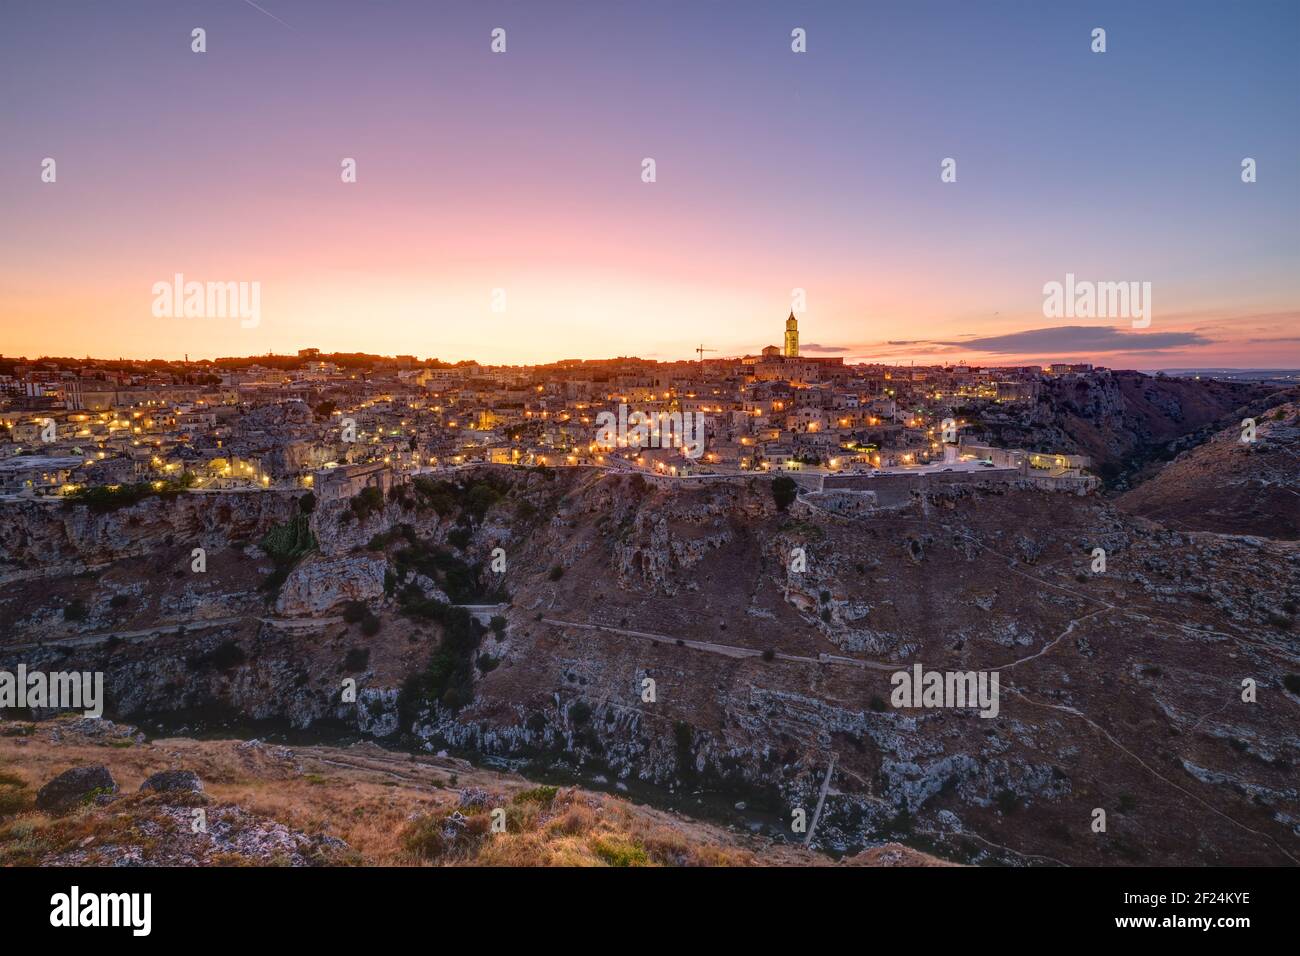 The beautiful old town of Matera and the canyon of the Gravina river after sunset Stock Photo